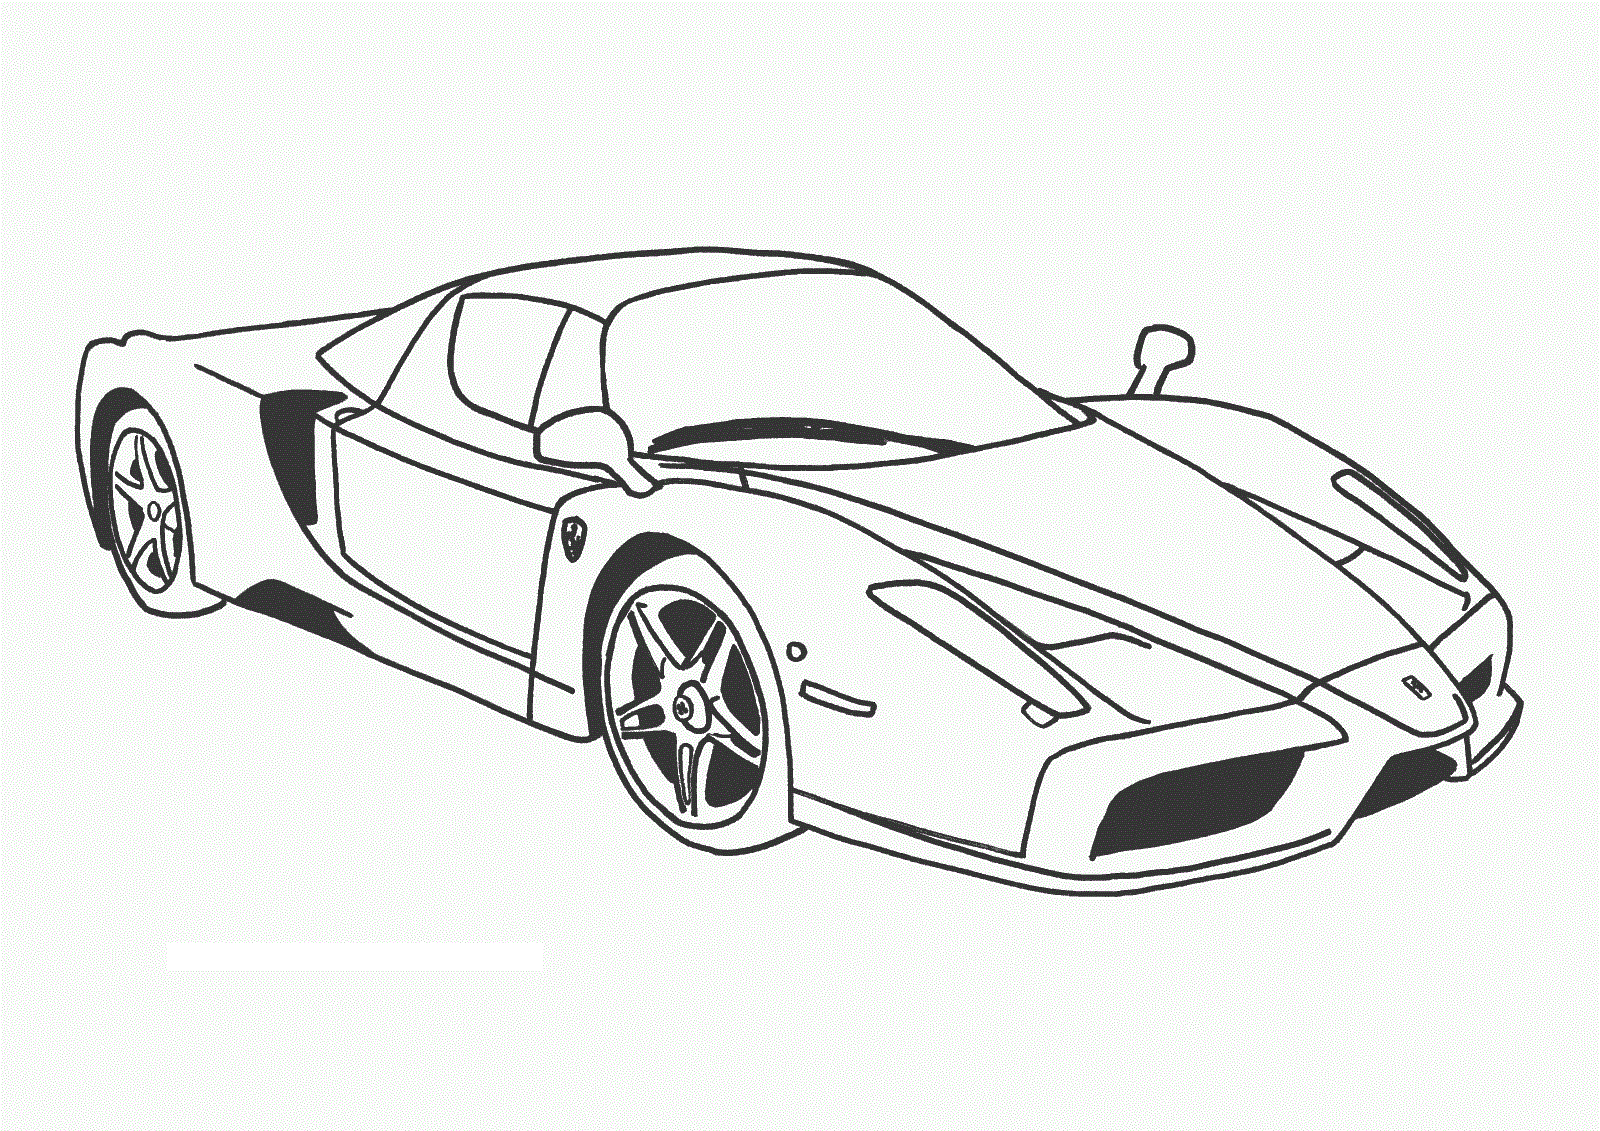 Cartoon Coloring Pages Cars For Kids for Adult